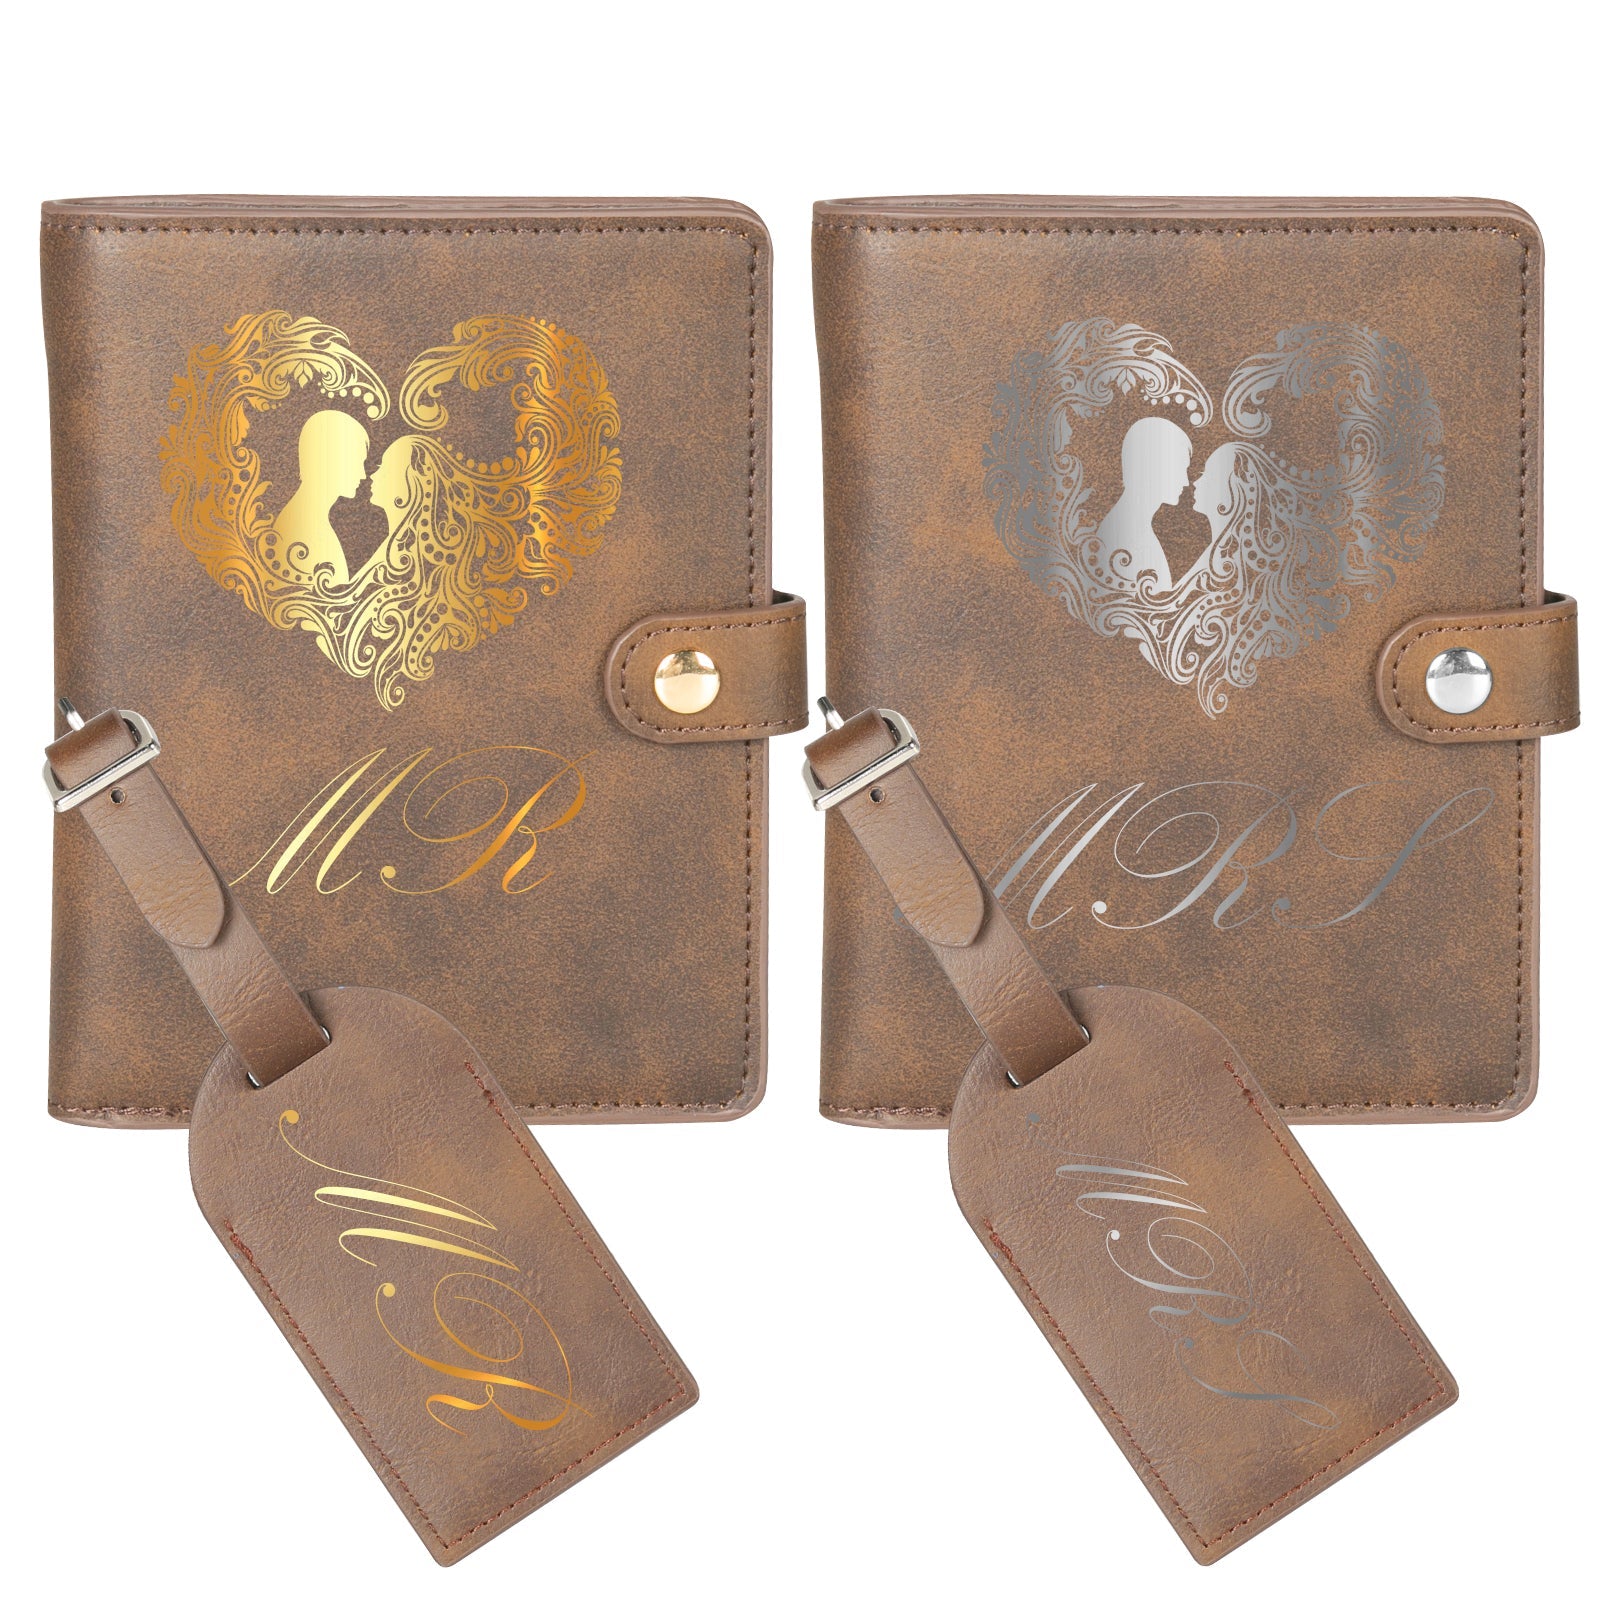 Personalized Leather Passport Holder Travel Wallet and Luggage Tag Set for DIY Laser Engraving - CREATORALLY